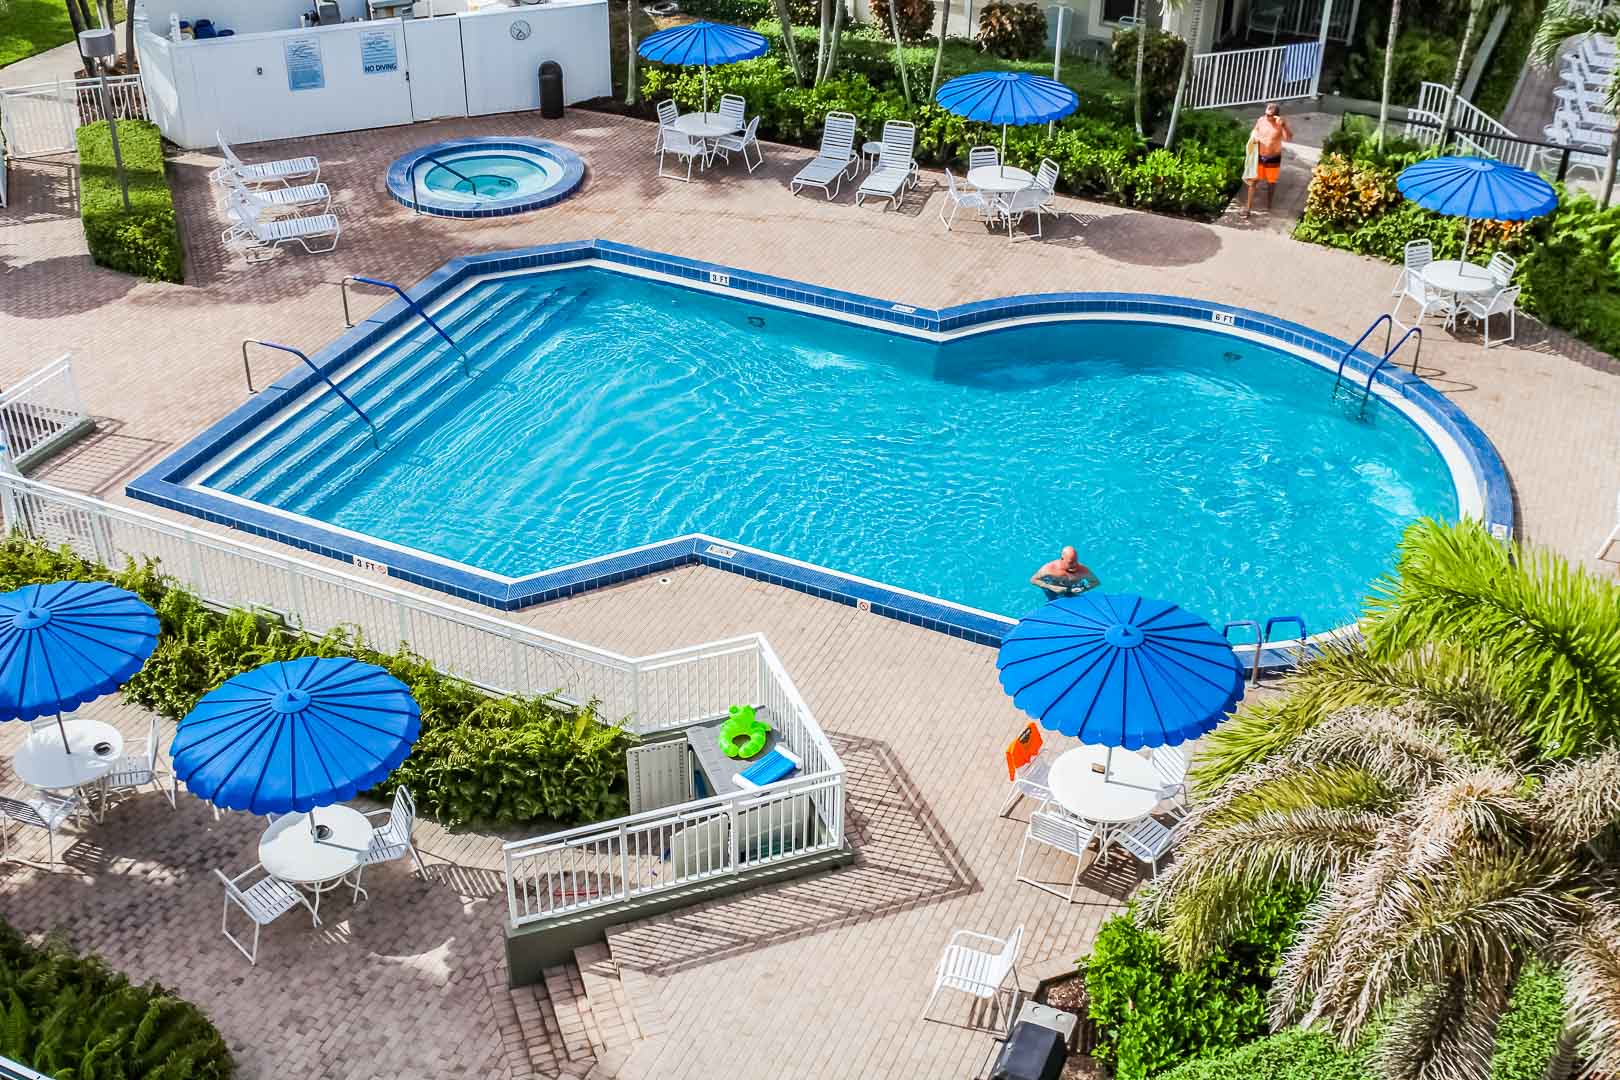 A refreshing pool and jacuzzi at VRI's Berkshire by the Sea in Florida.